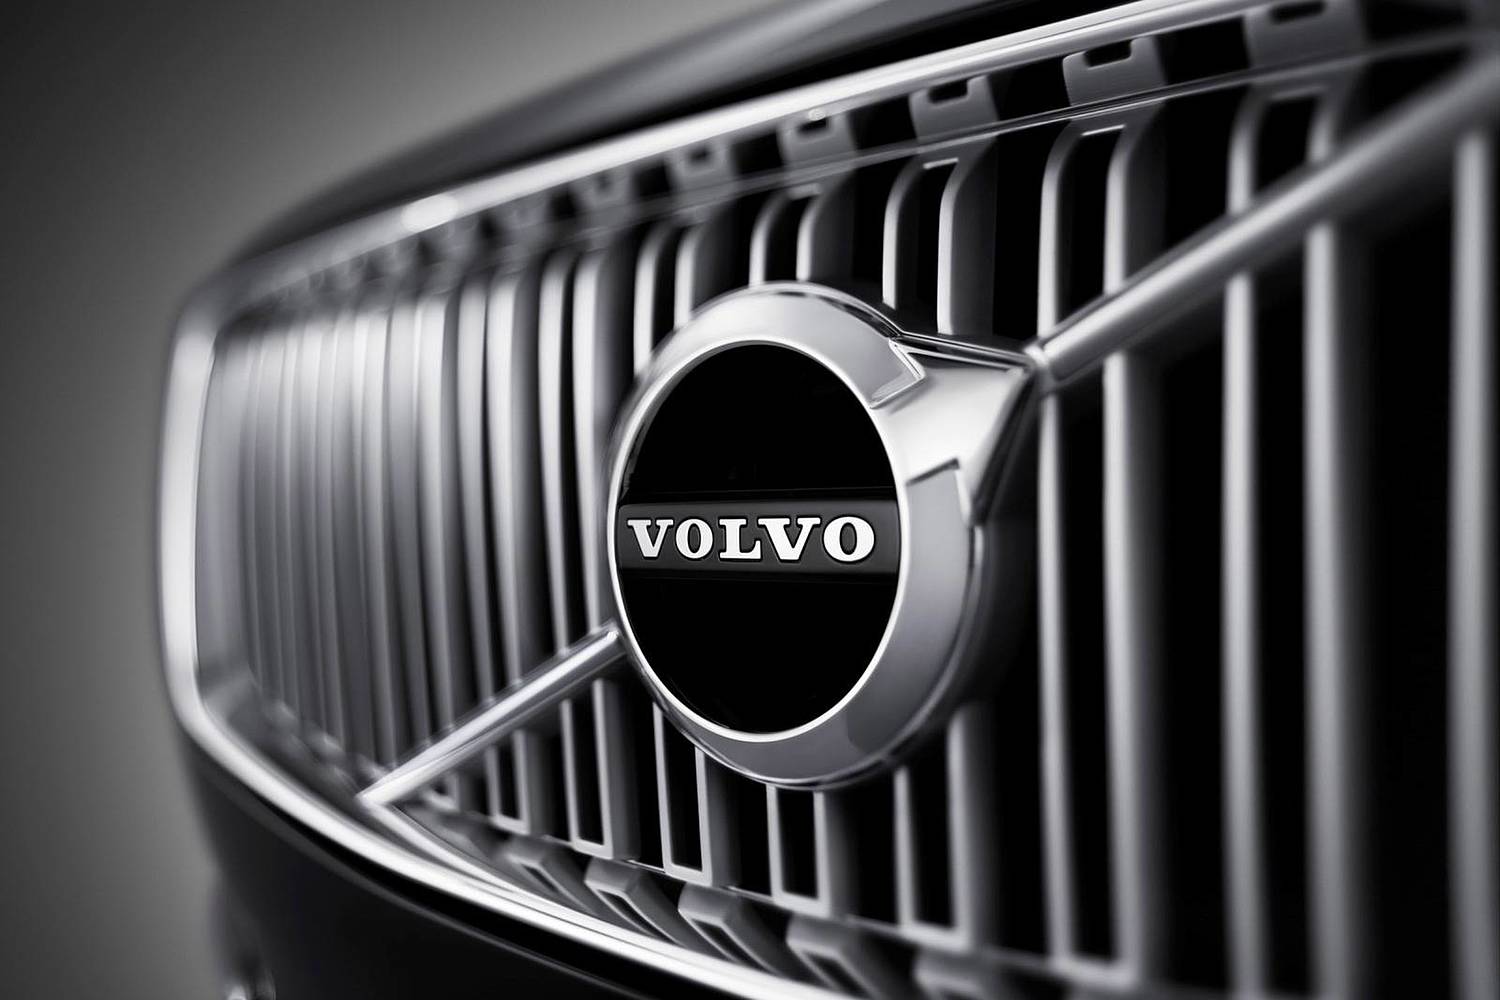 Volvo XC90 T6 Inscription 4dr SUV Front Badge (2016 model year shown)